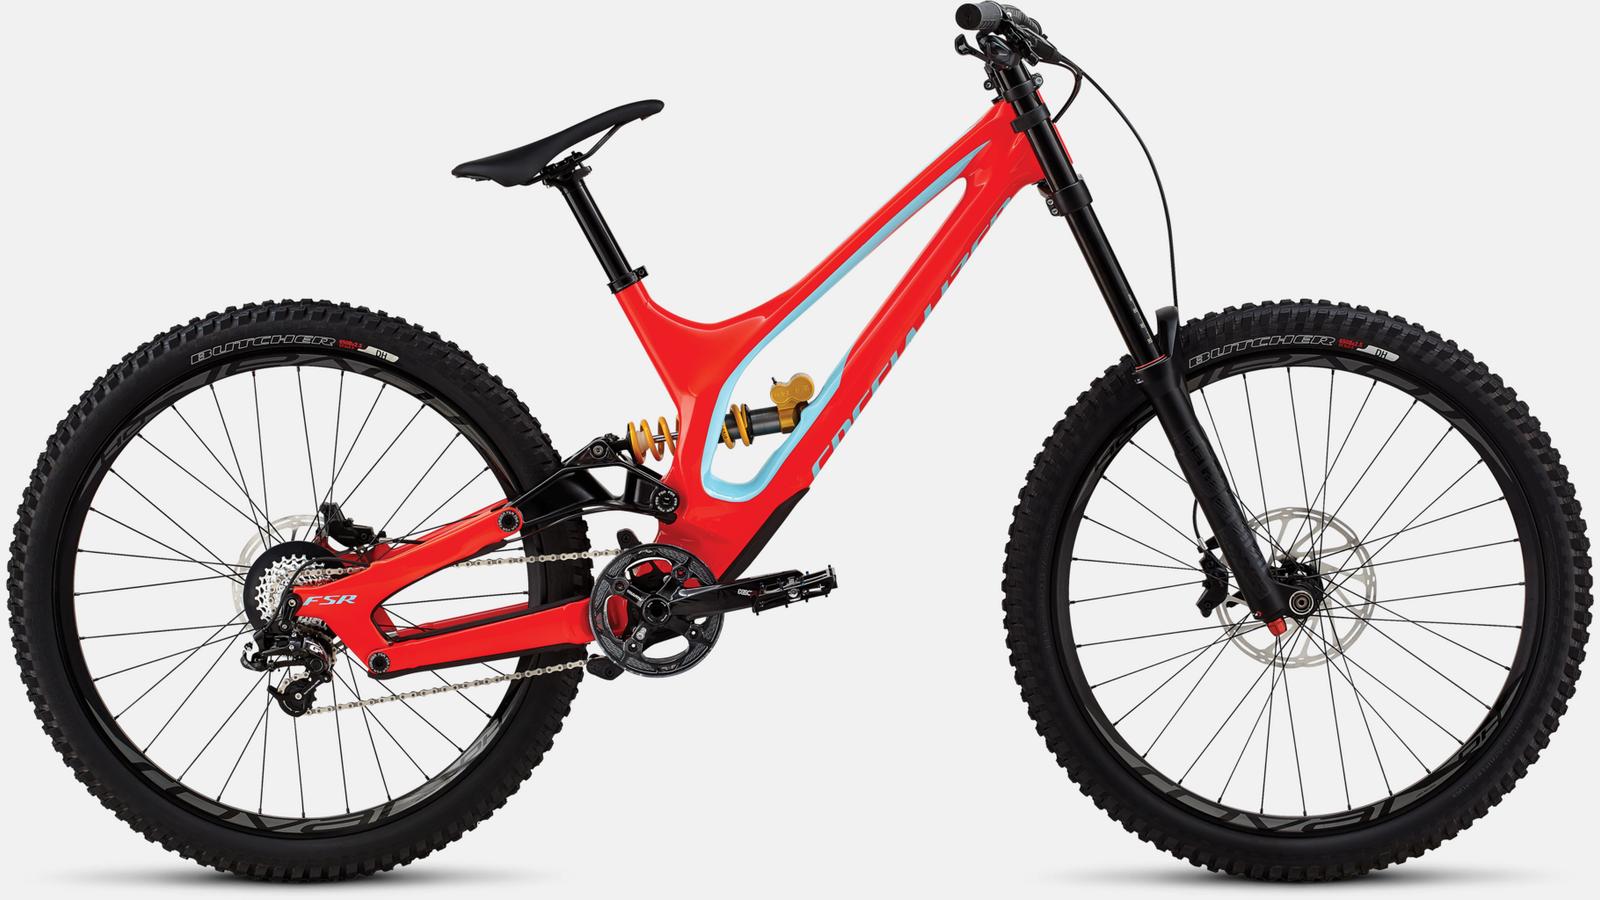 Paint for 2018 Specialized Demo 8 Carbon - Gloss Rocket Red